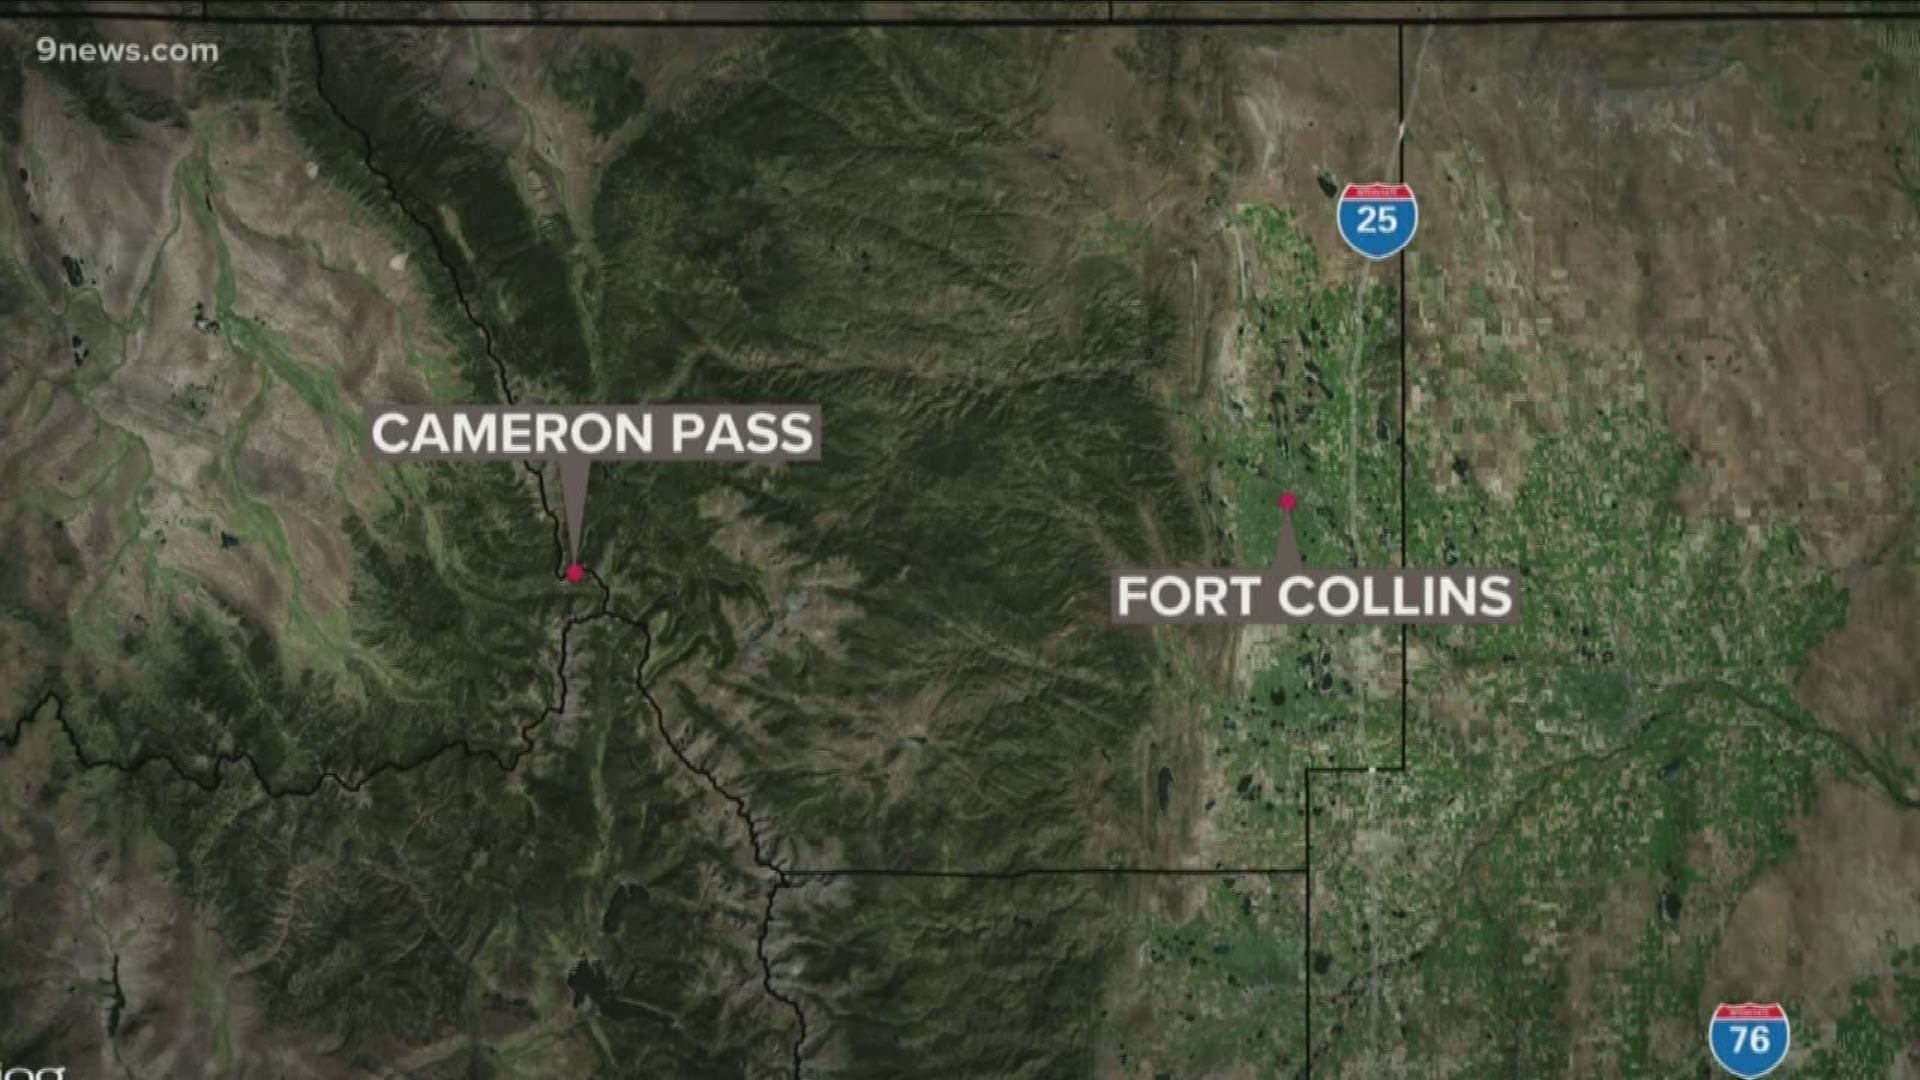 The skier, a 29-year-old woman from Fort Collins, was not breathing after the avalanche, officials said.